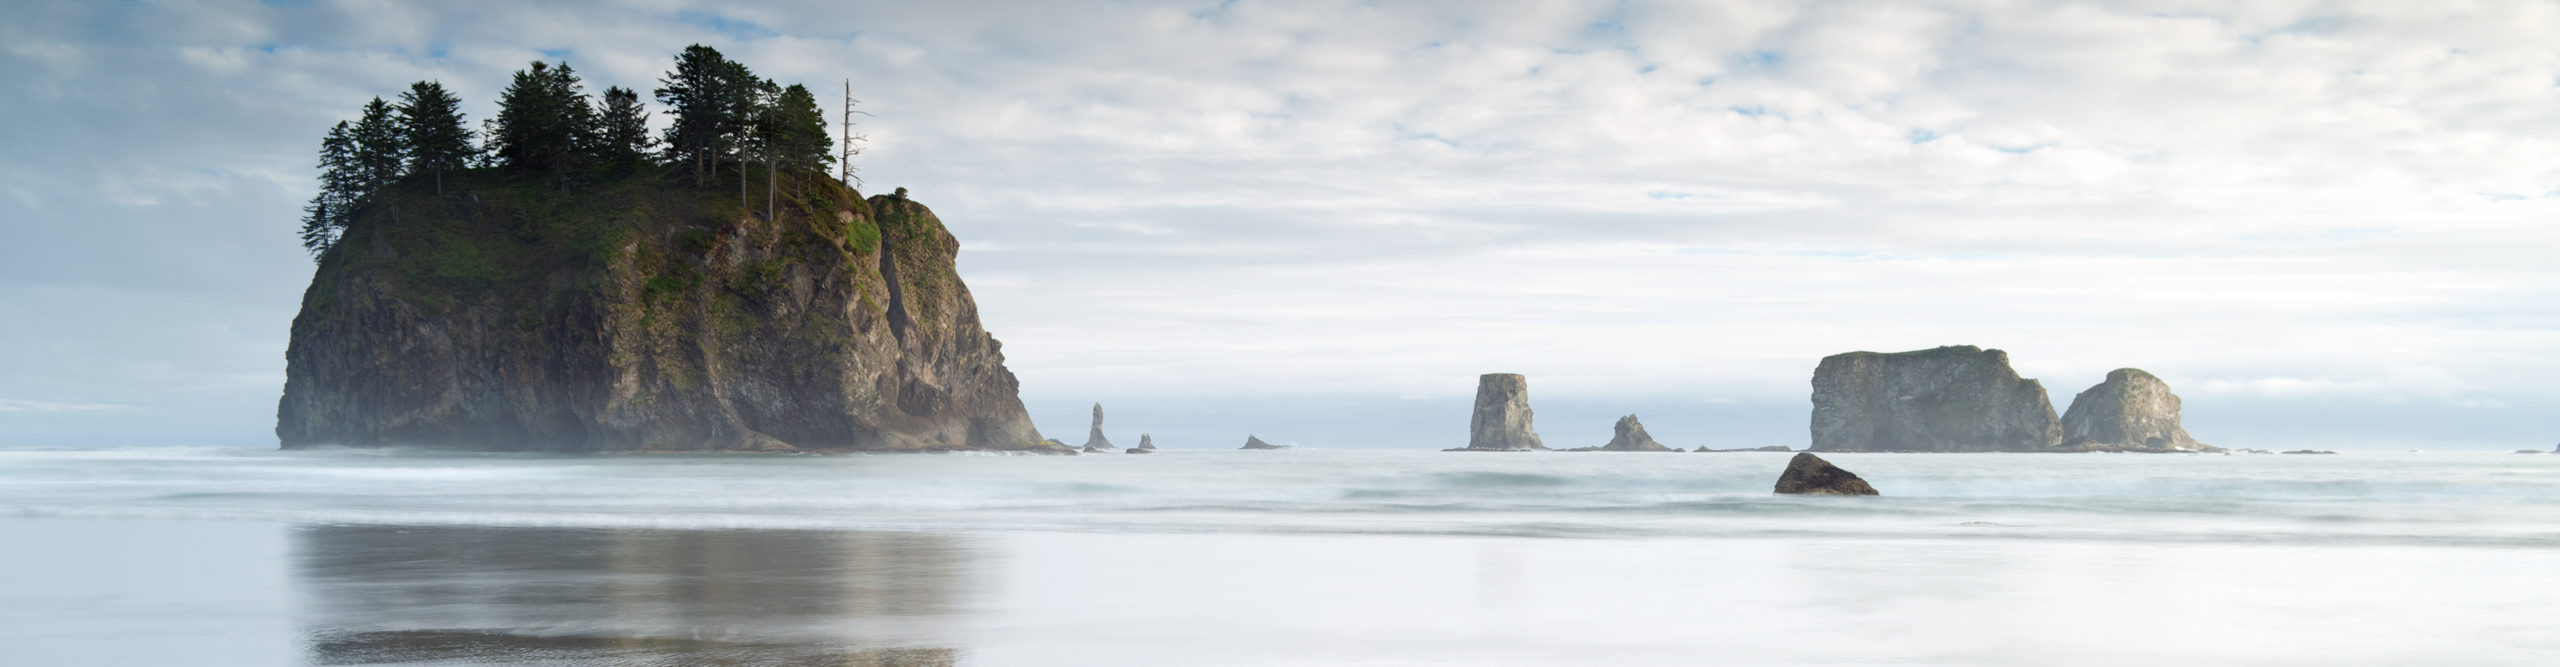 The beautiful Second Beach on the olympic National Park Coast, on a cloudy day La Push, W.A, USA.